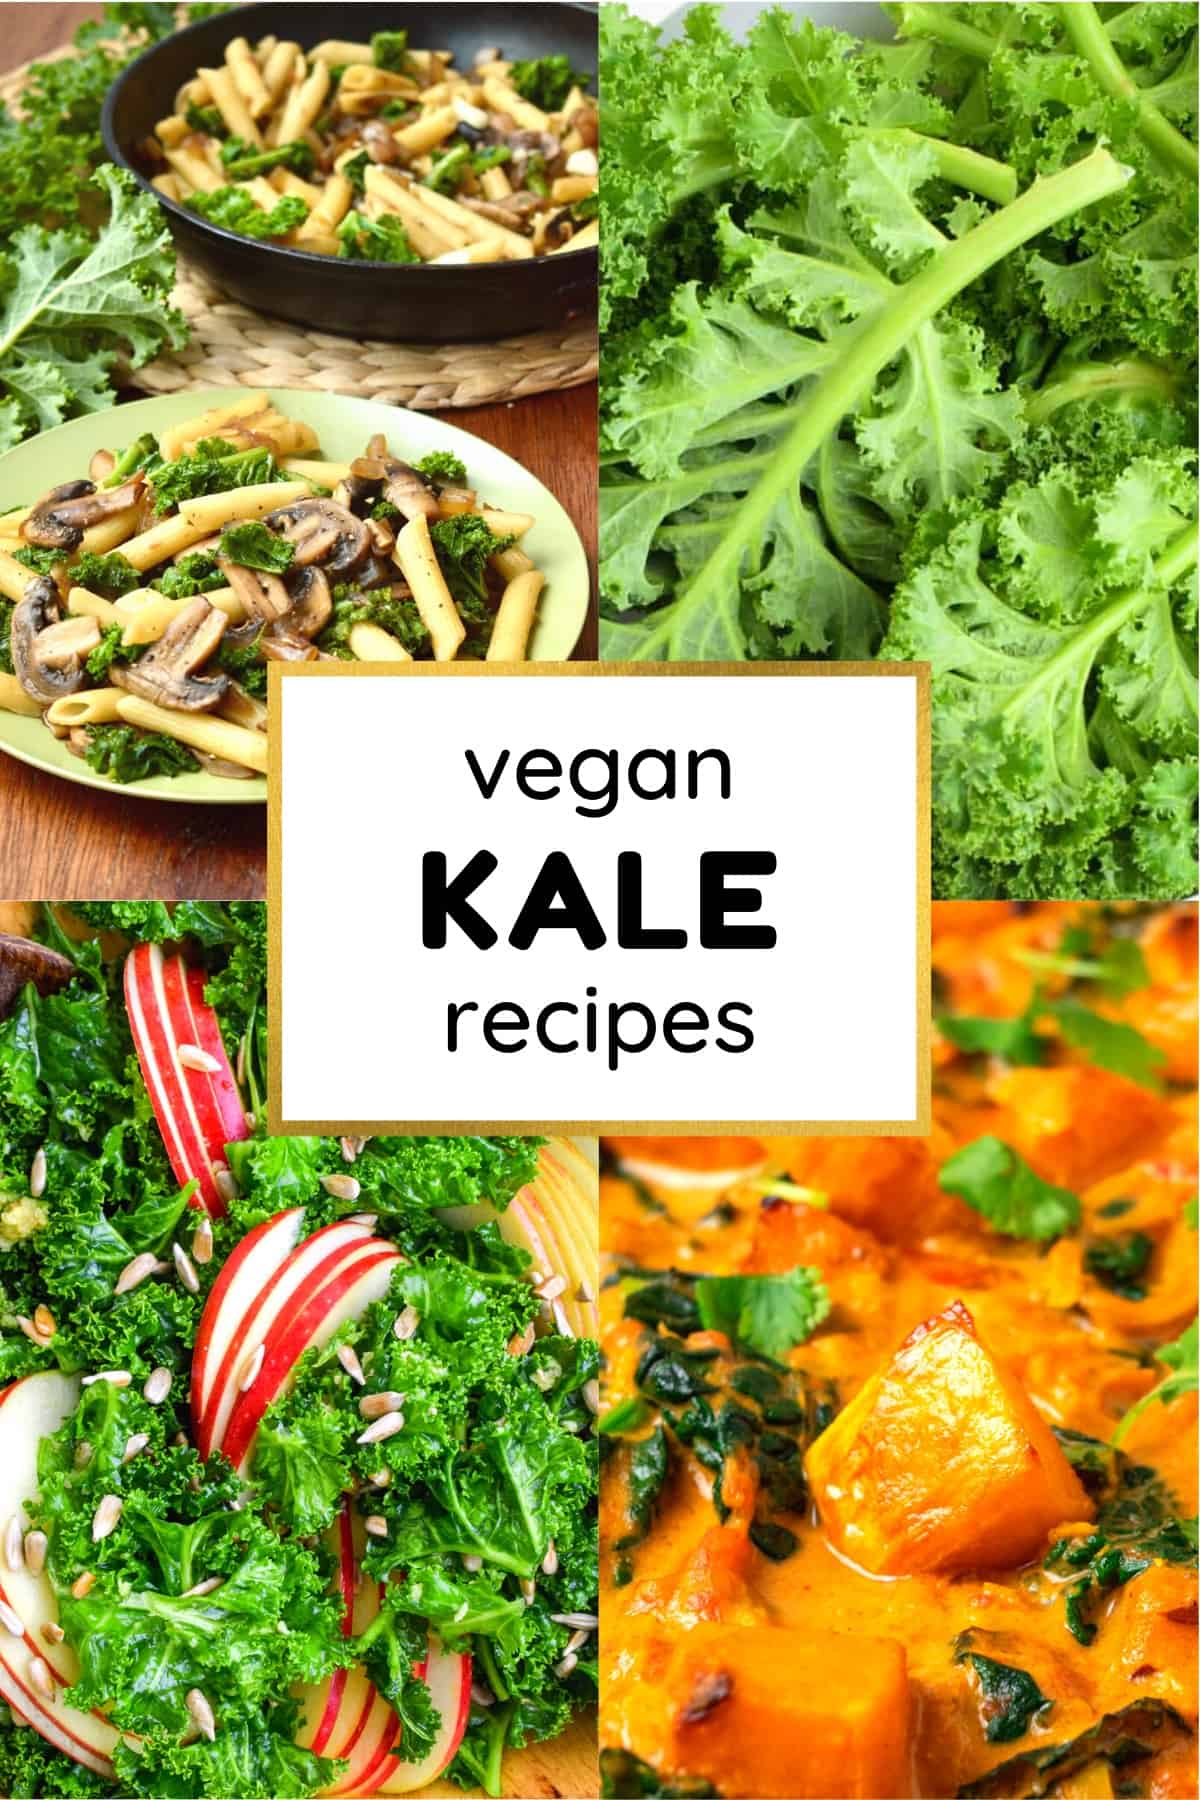 A Collage of Vegan Kale Recipes - Pasta, Salad, Curry and Fresh Kale Leaves.